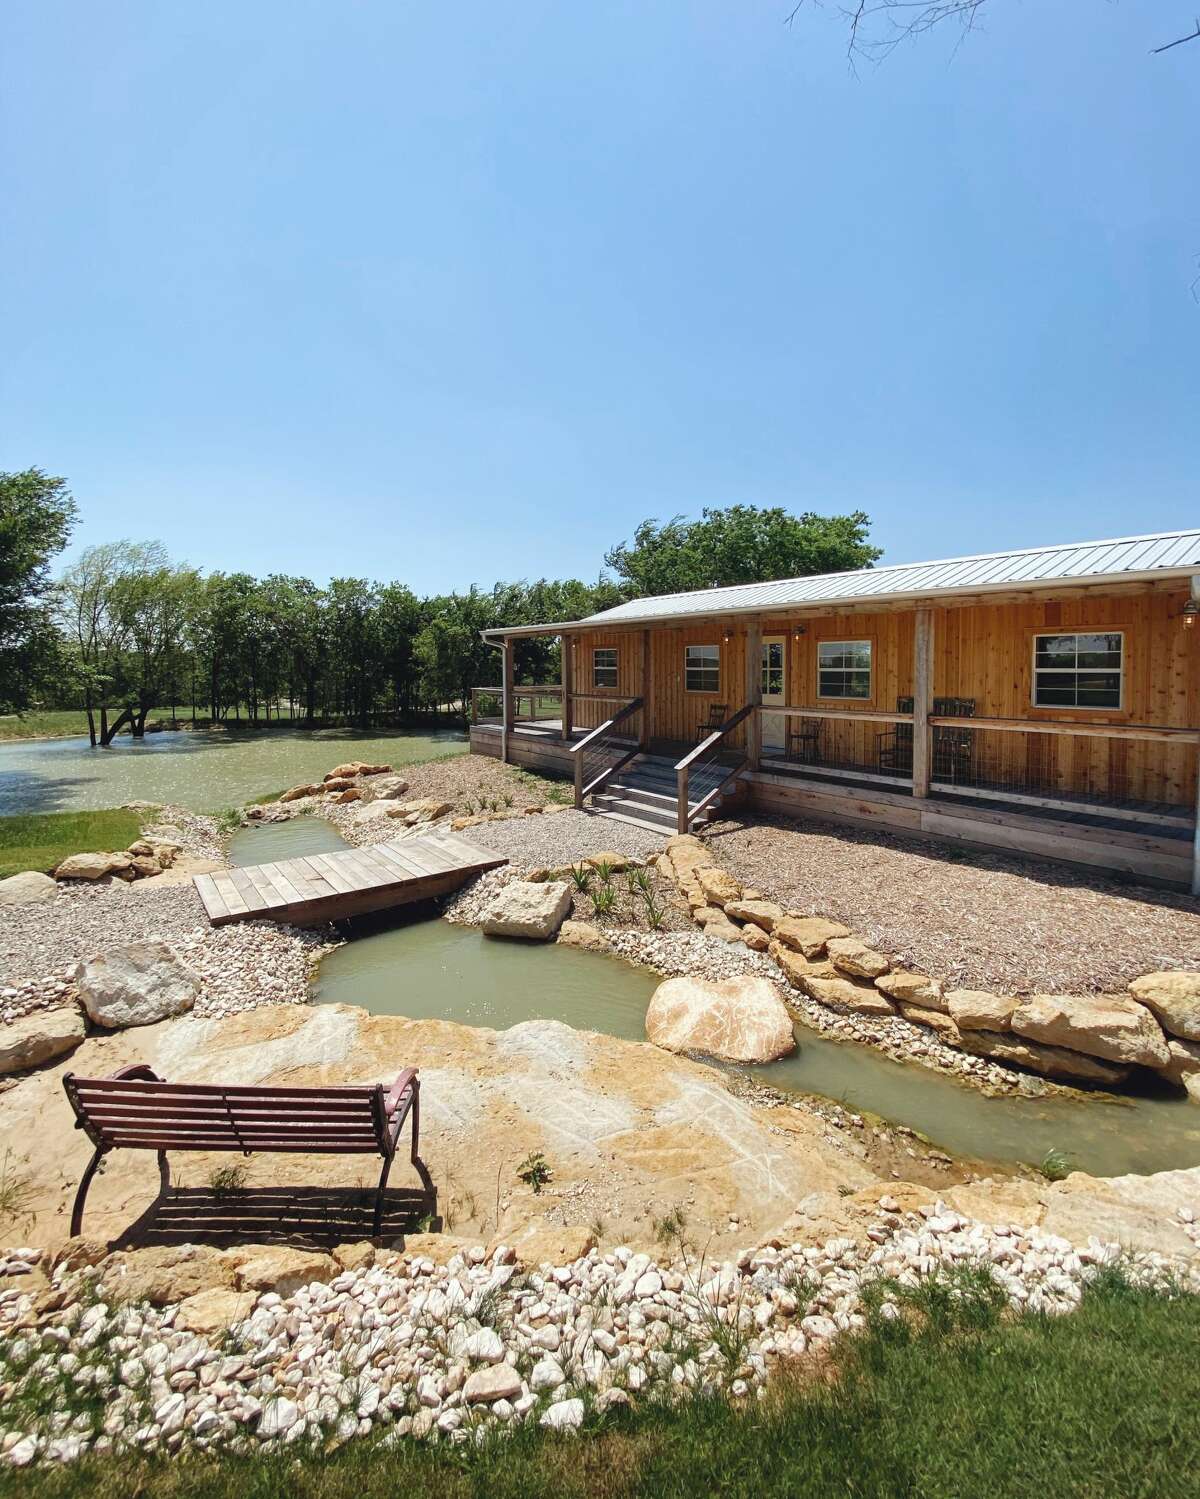 The Range Vintage Trailer Resort will open on June 1 along the Ennis Bluebonnet Trail in Bristol, Texas, just 30 minutes south of Dallas.